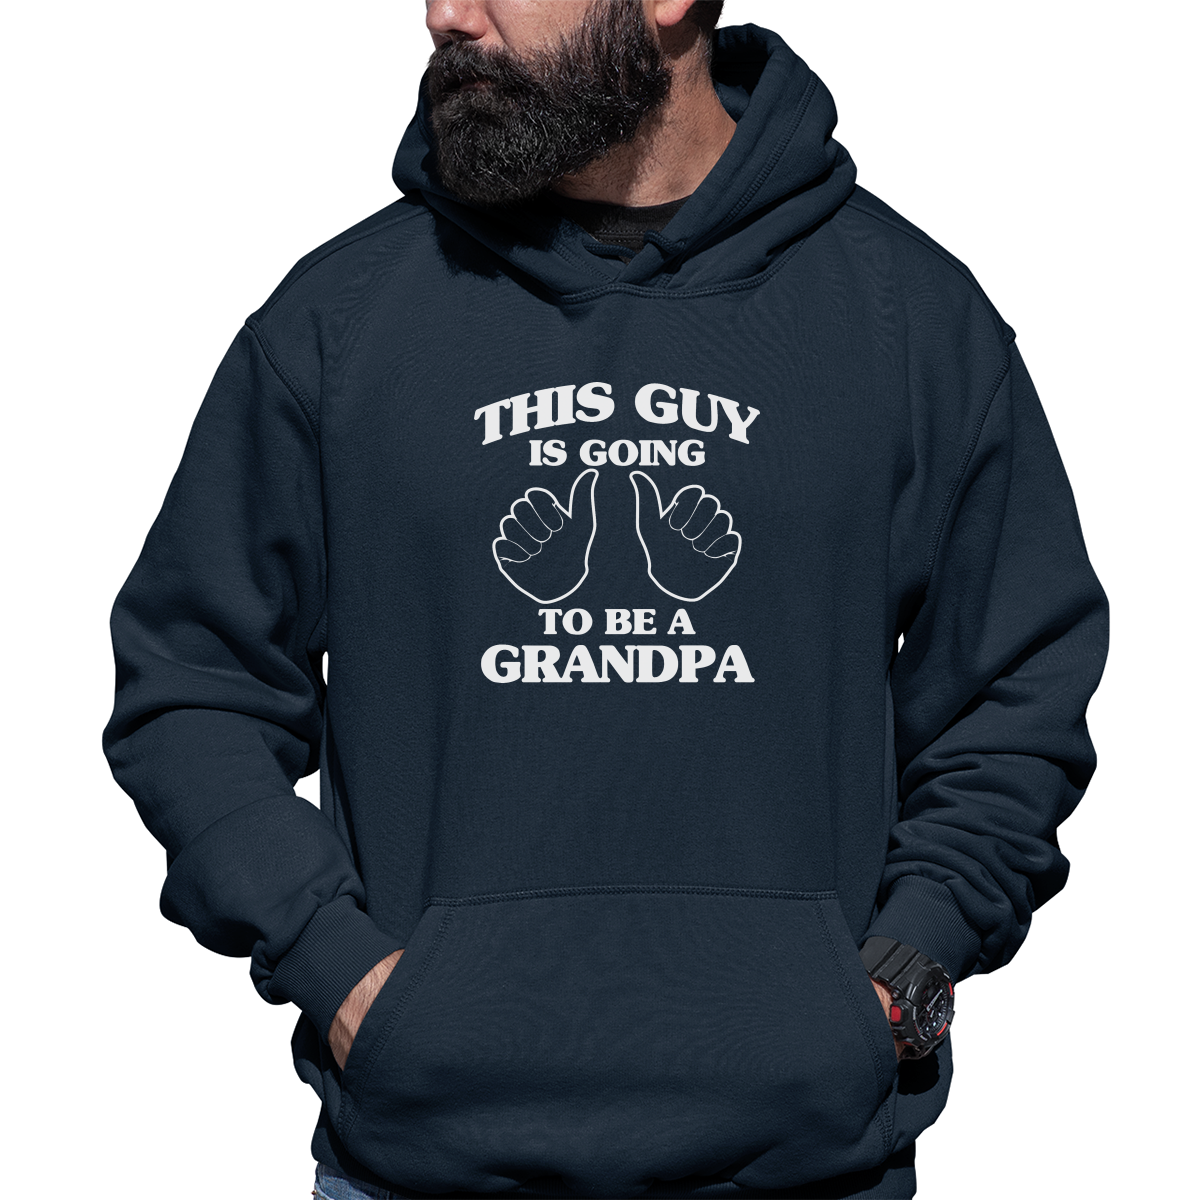 This Guy Is Going To Be A Grandpa Unisex Hoodie | Navy